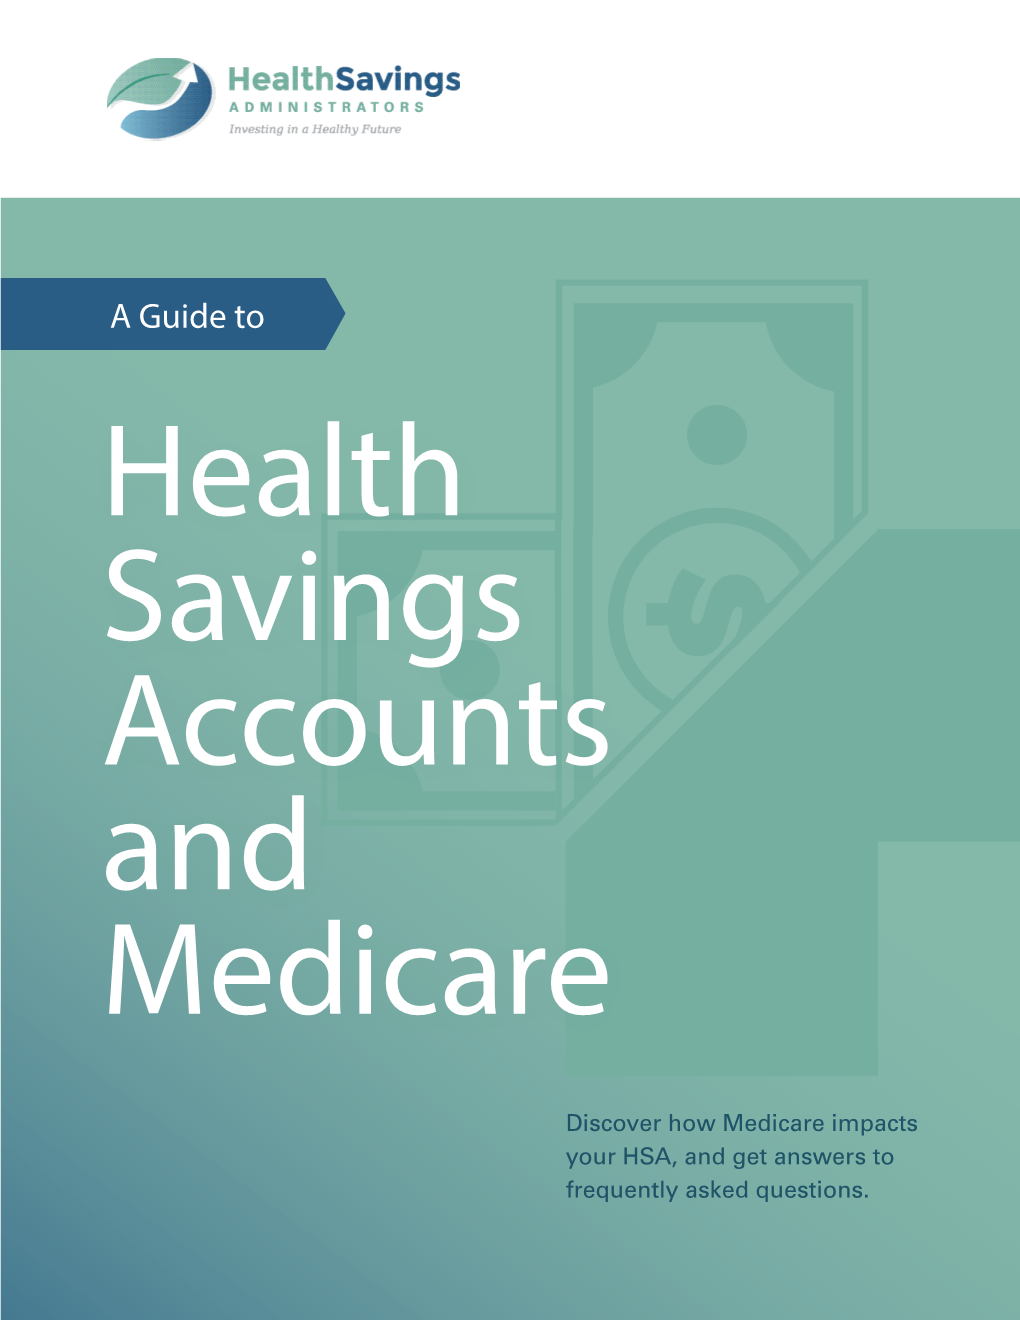 A Guide to Health Savings Accounts and Medicare